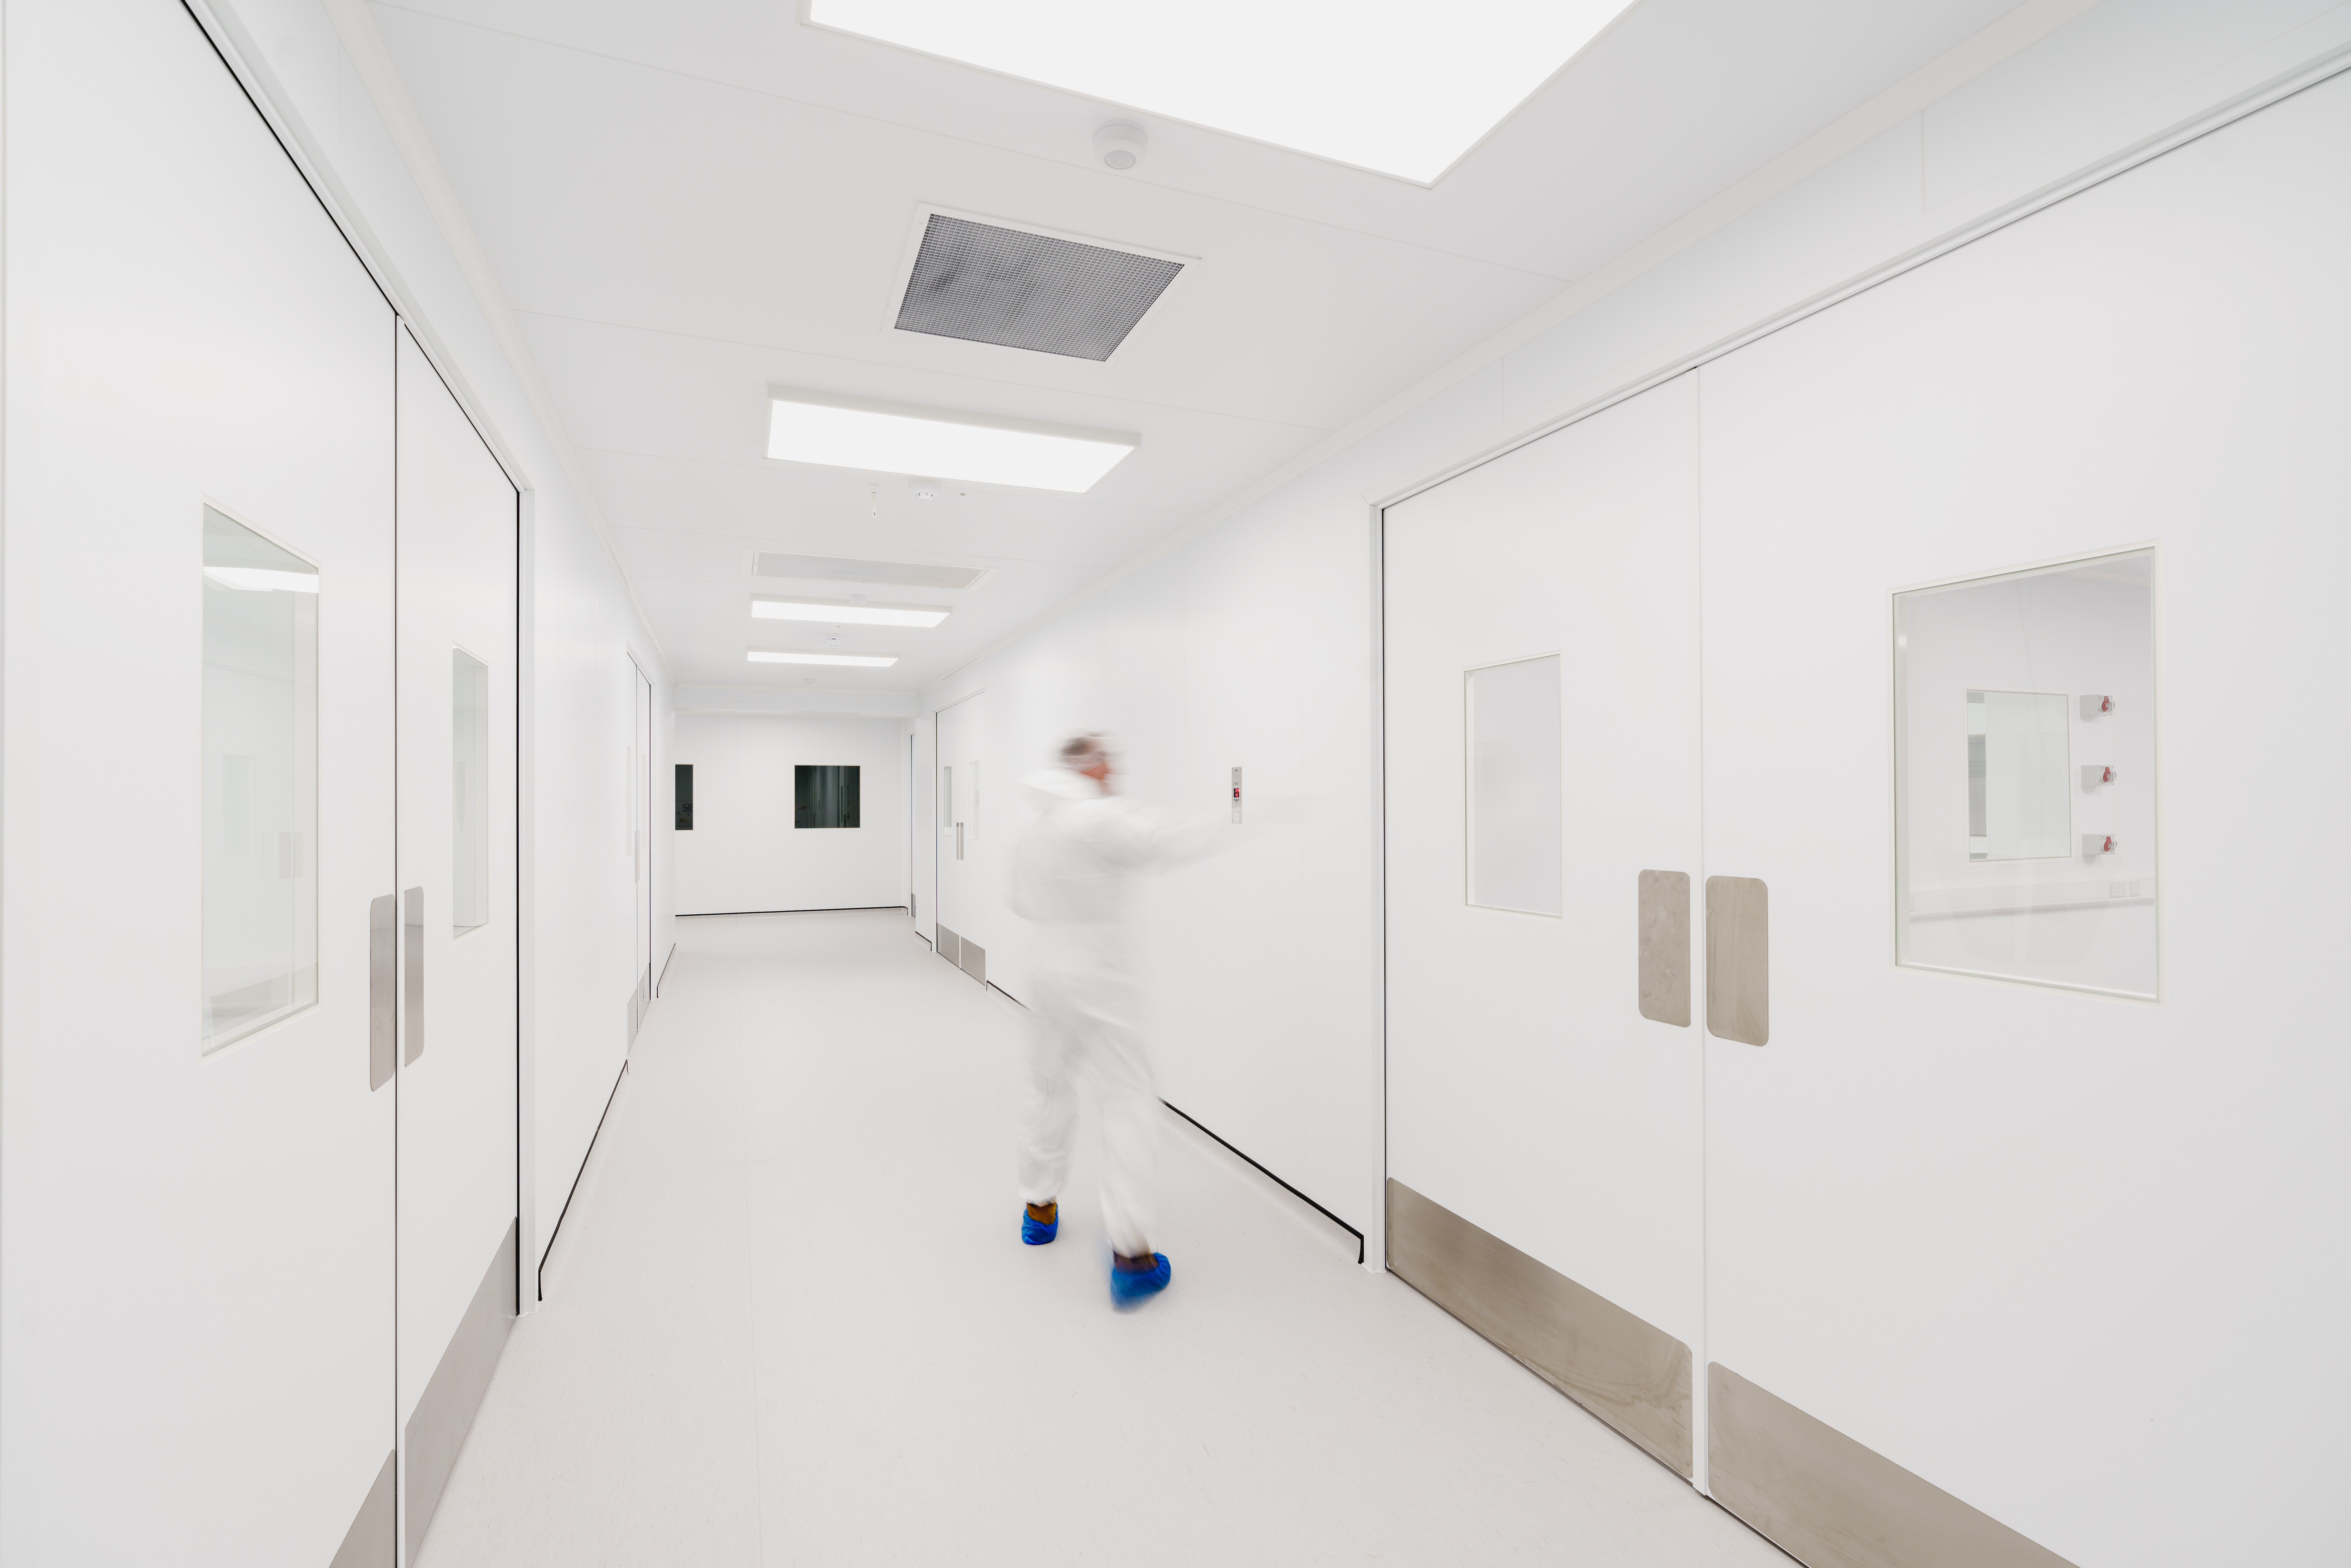 Creating a custom facility for a growing life sciences research business 